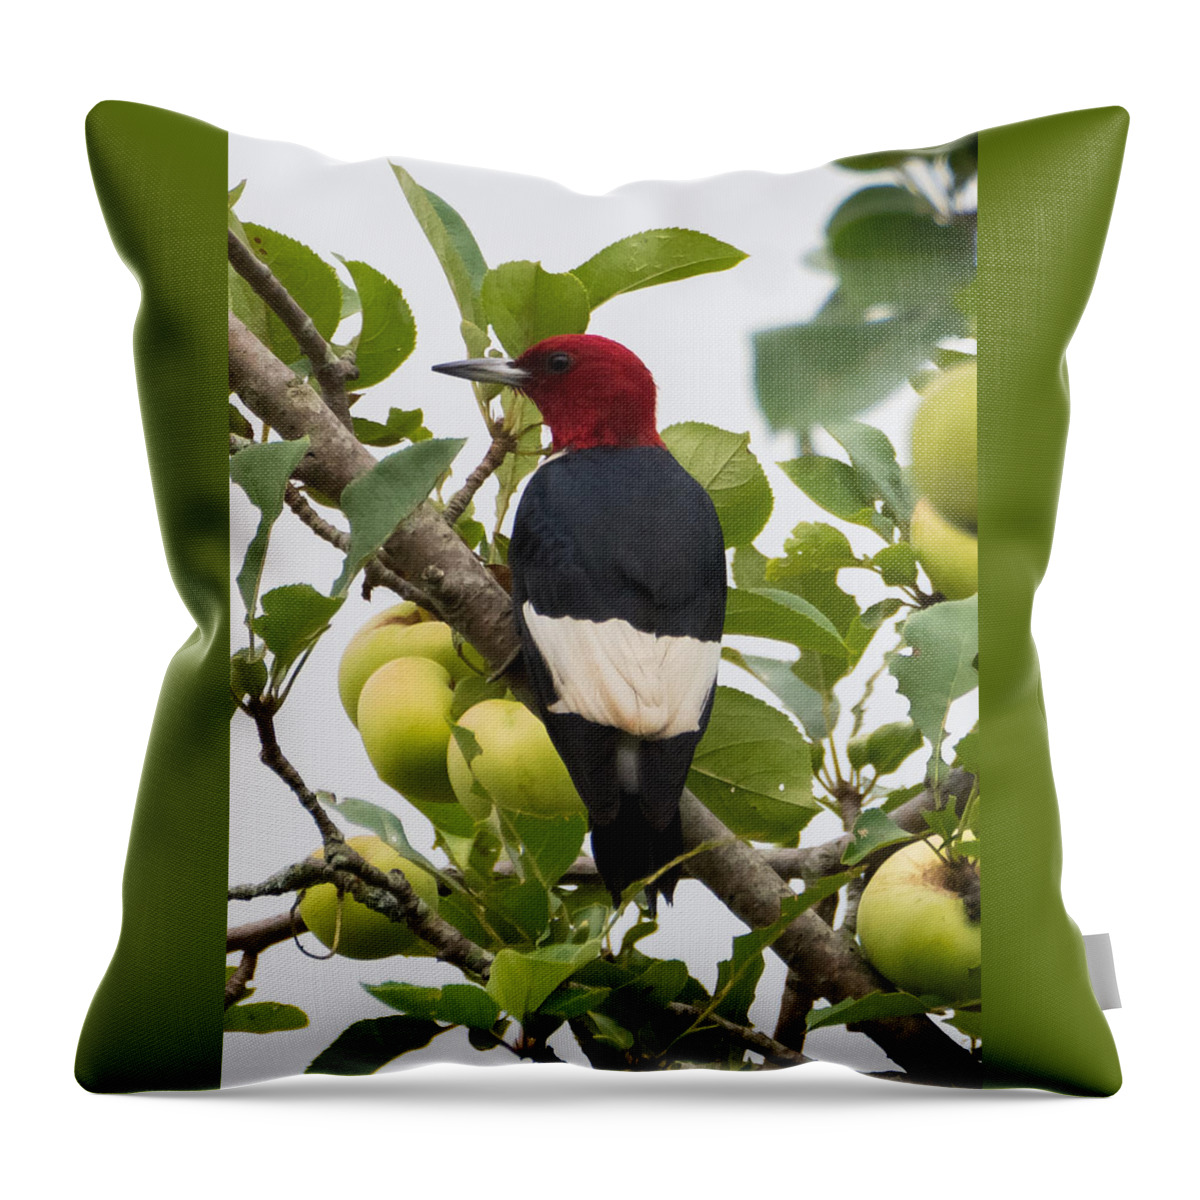 Red-headed Woodpecker Throw Pillow featuring the photograph Red-Headed Woodpecker by Holden The Moment